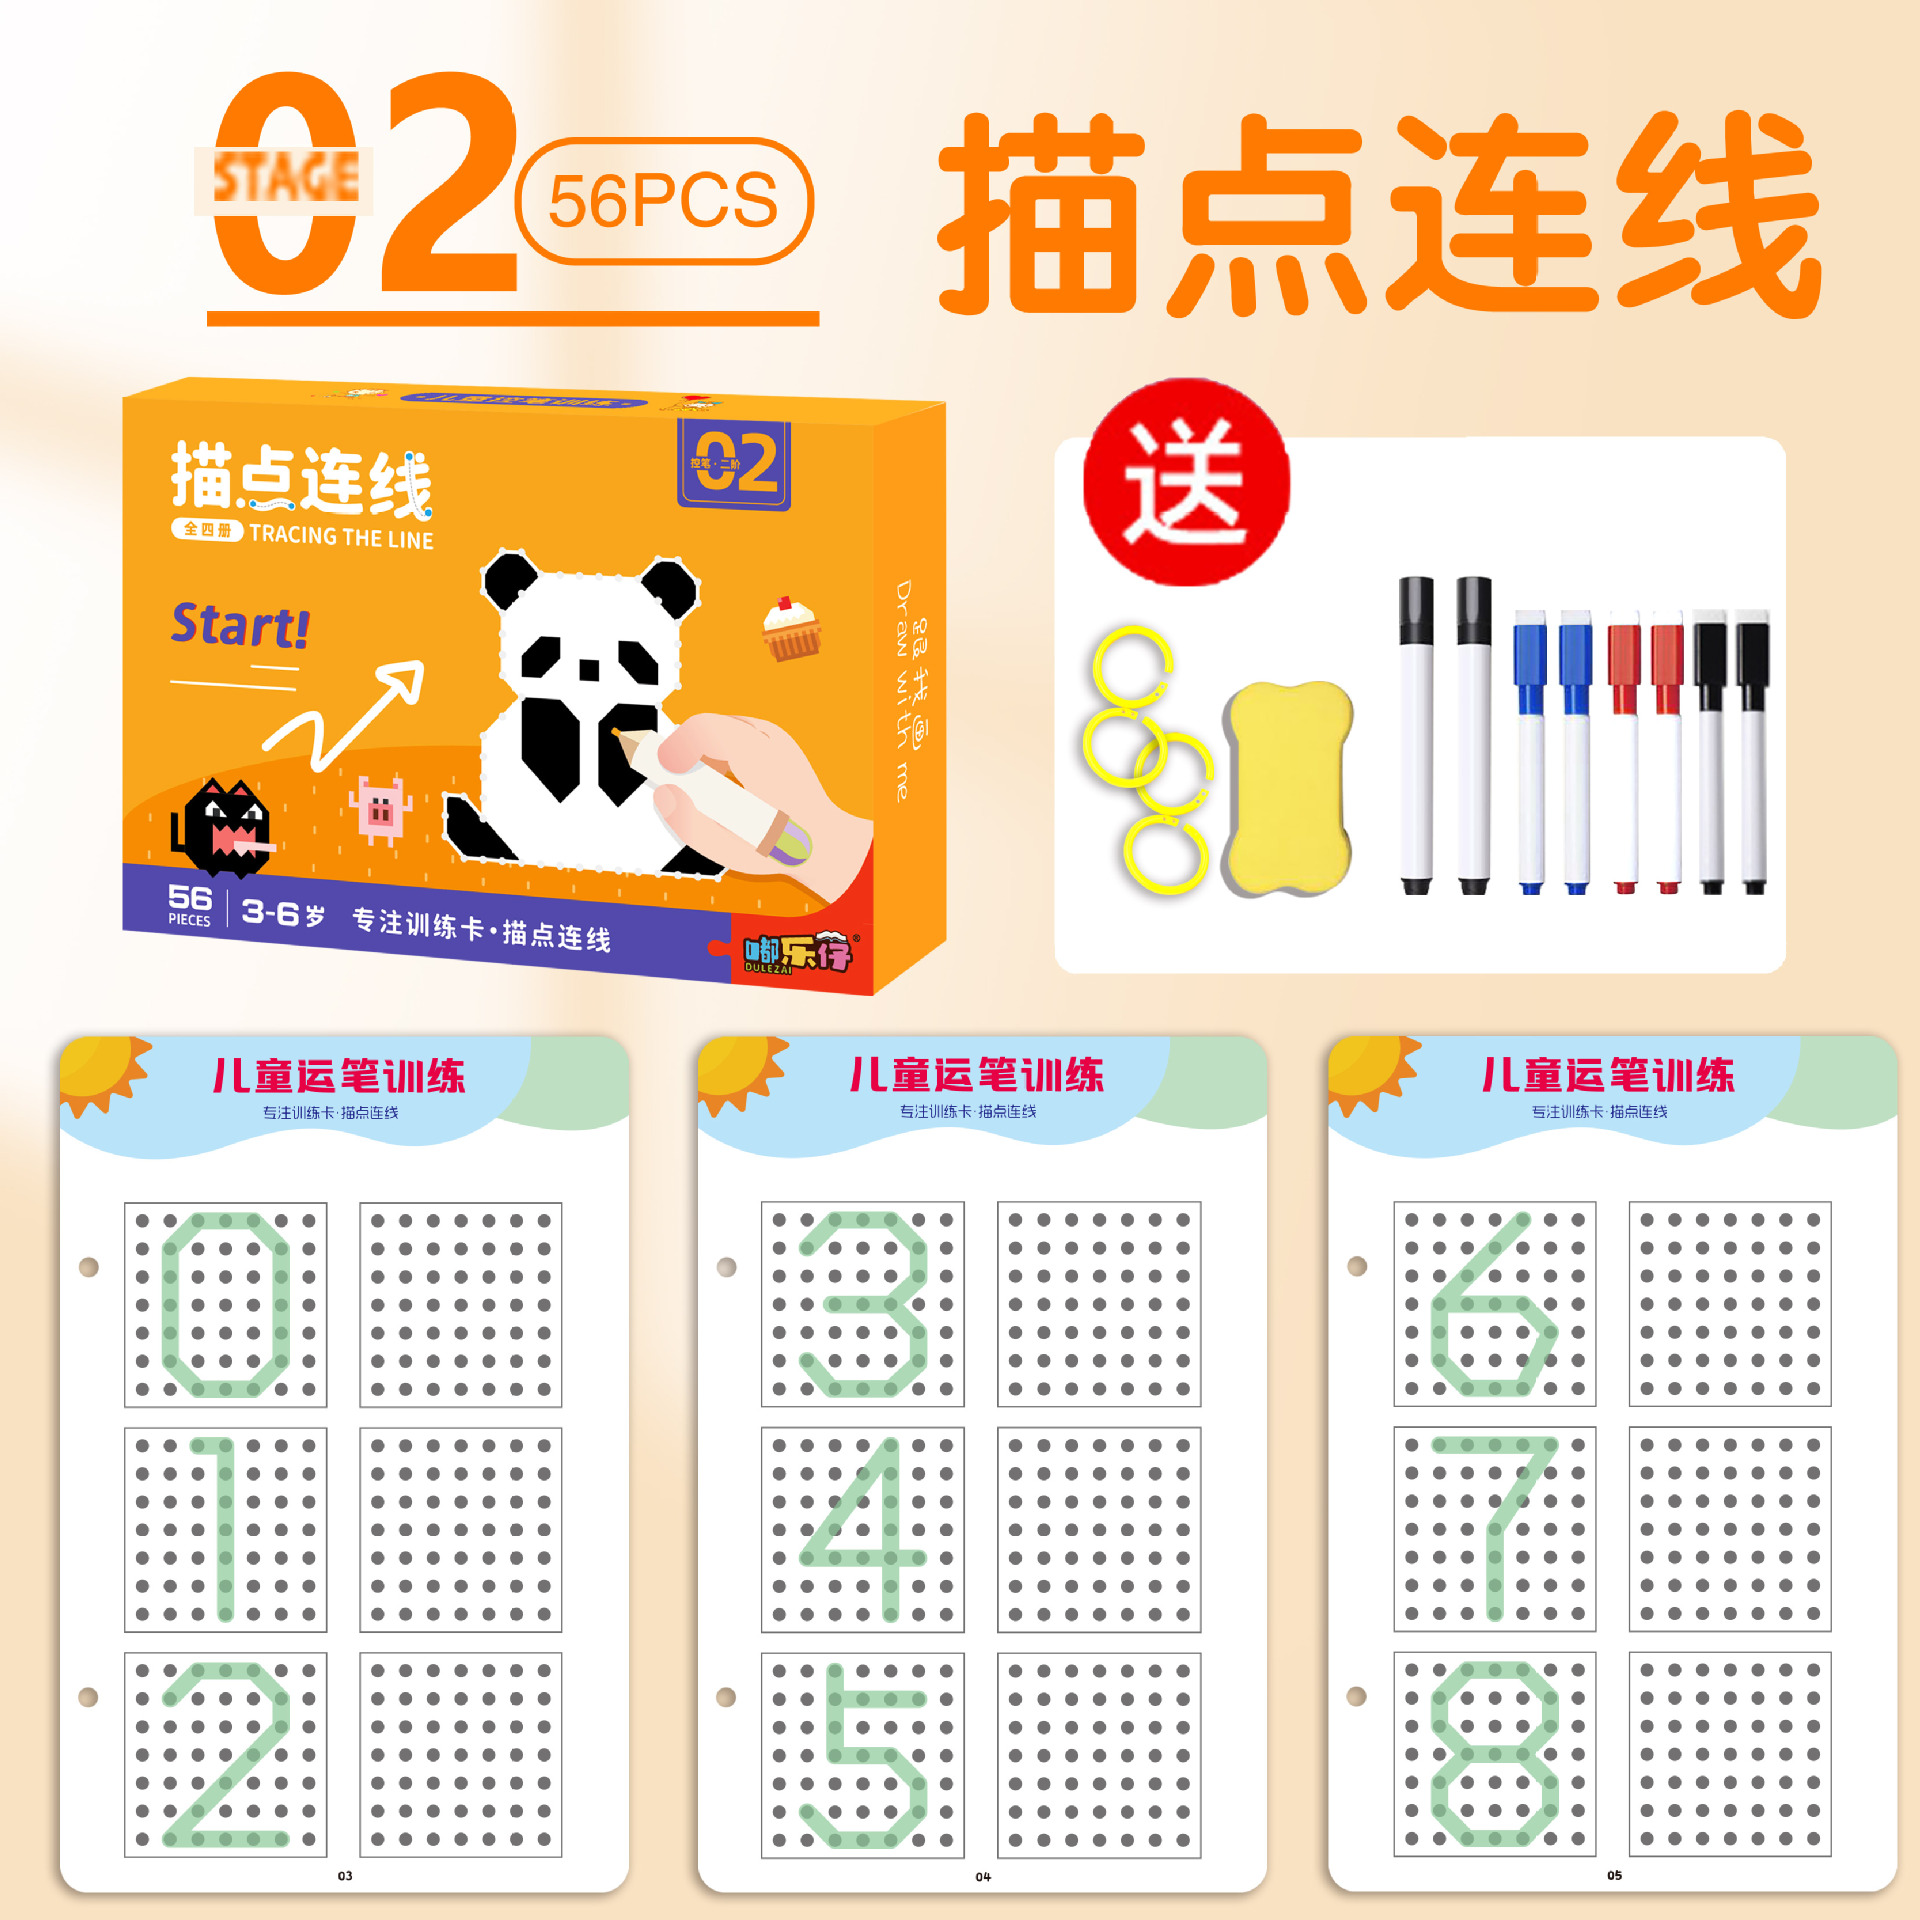 Du Lezai Advanced Logical Thinking Enlightenment Training Card Children's Early Childhood Education Pen Control Training Maze Early Learning Card